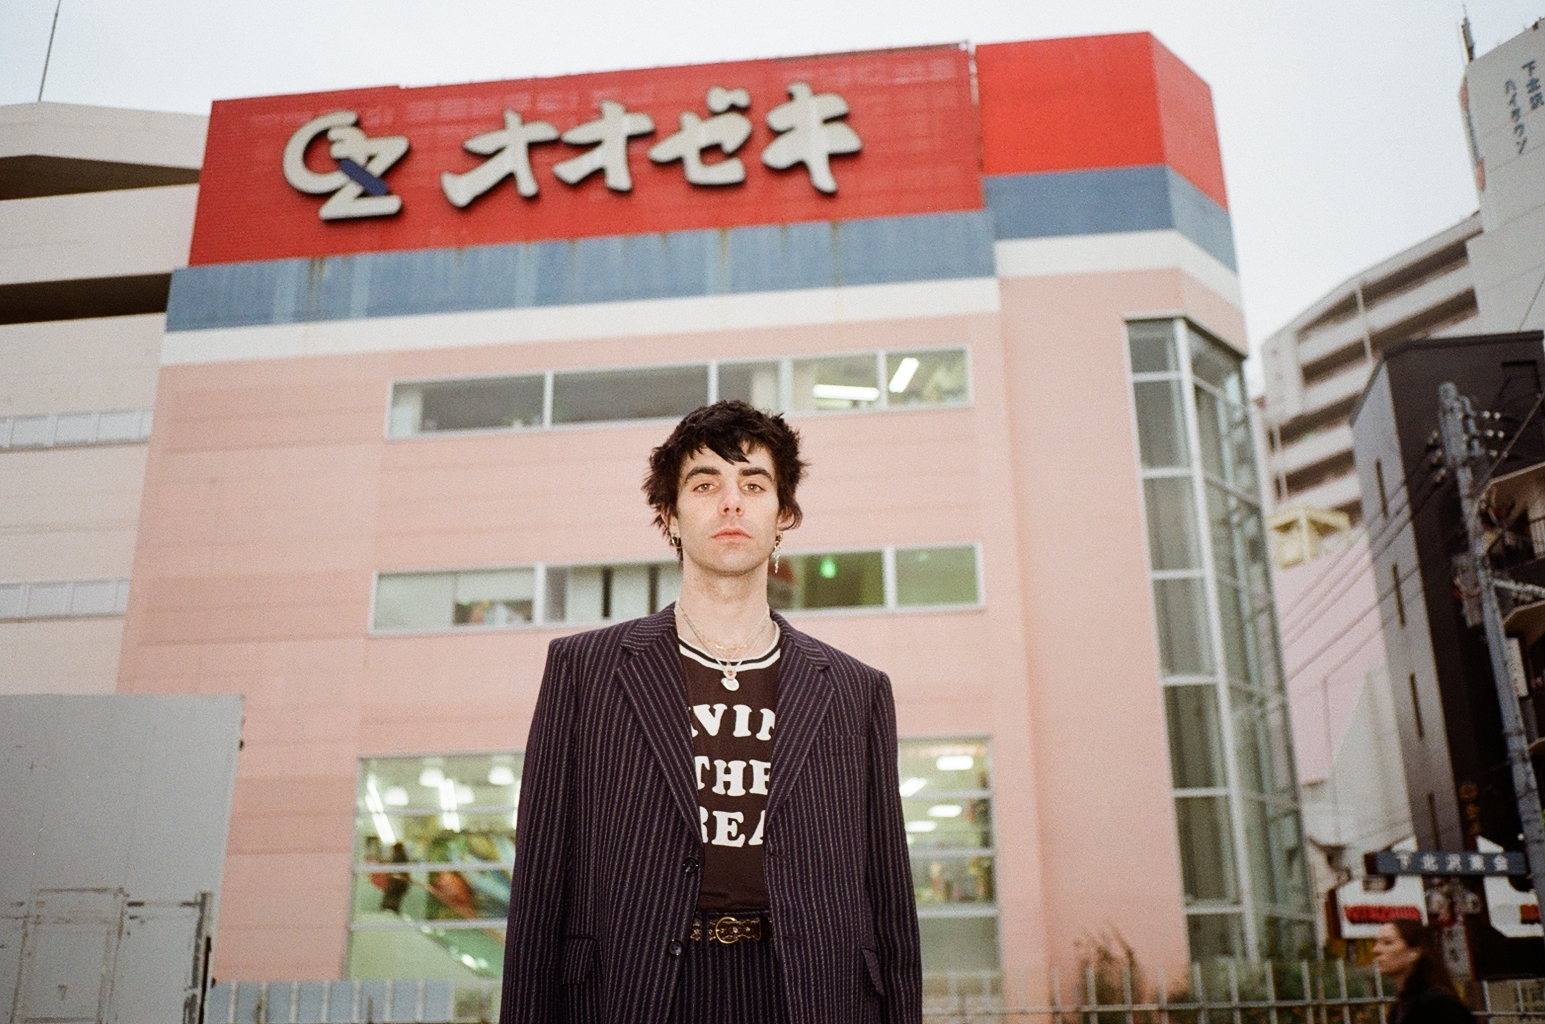 Emerson Snowe Announces ‘Emerson Snowe’s Splatterpunk’ EP For June 23 + Releases New Song ‘You’re My Boy, Baby!’